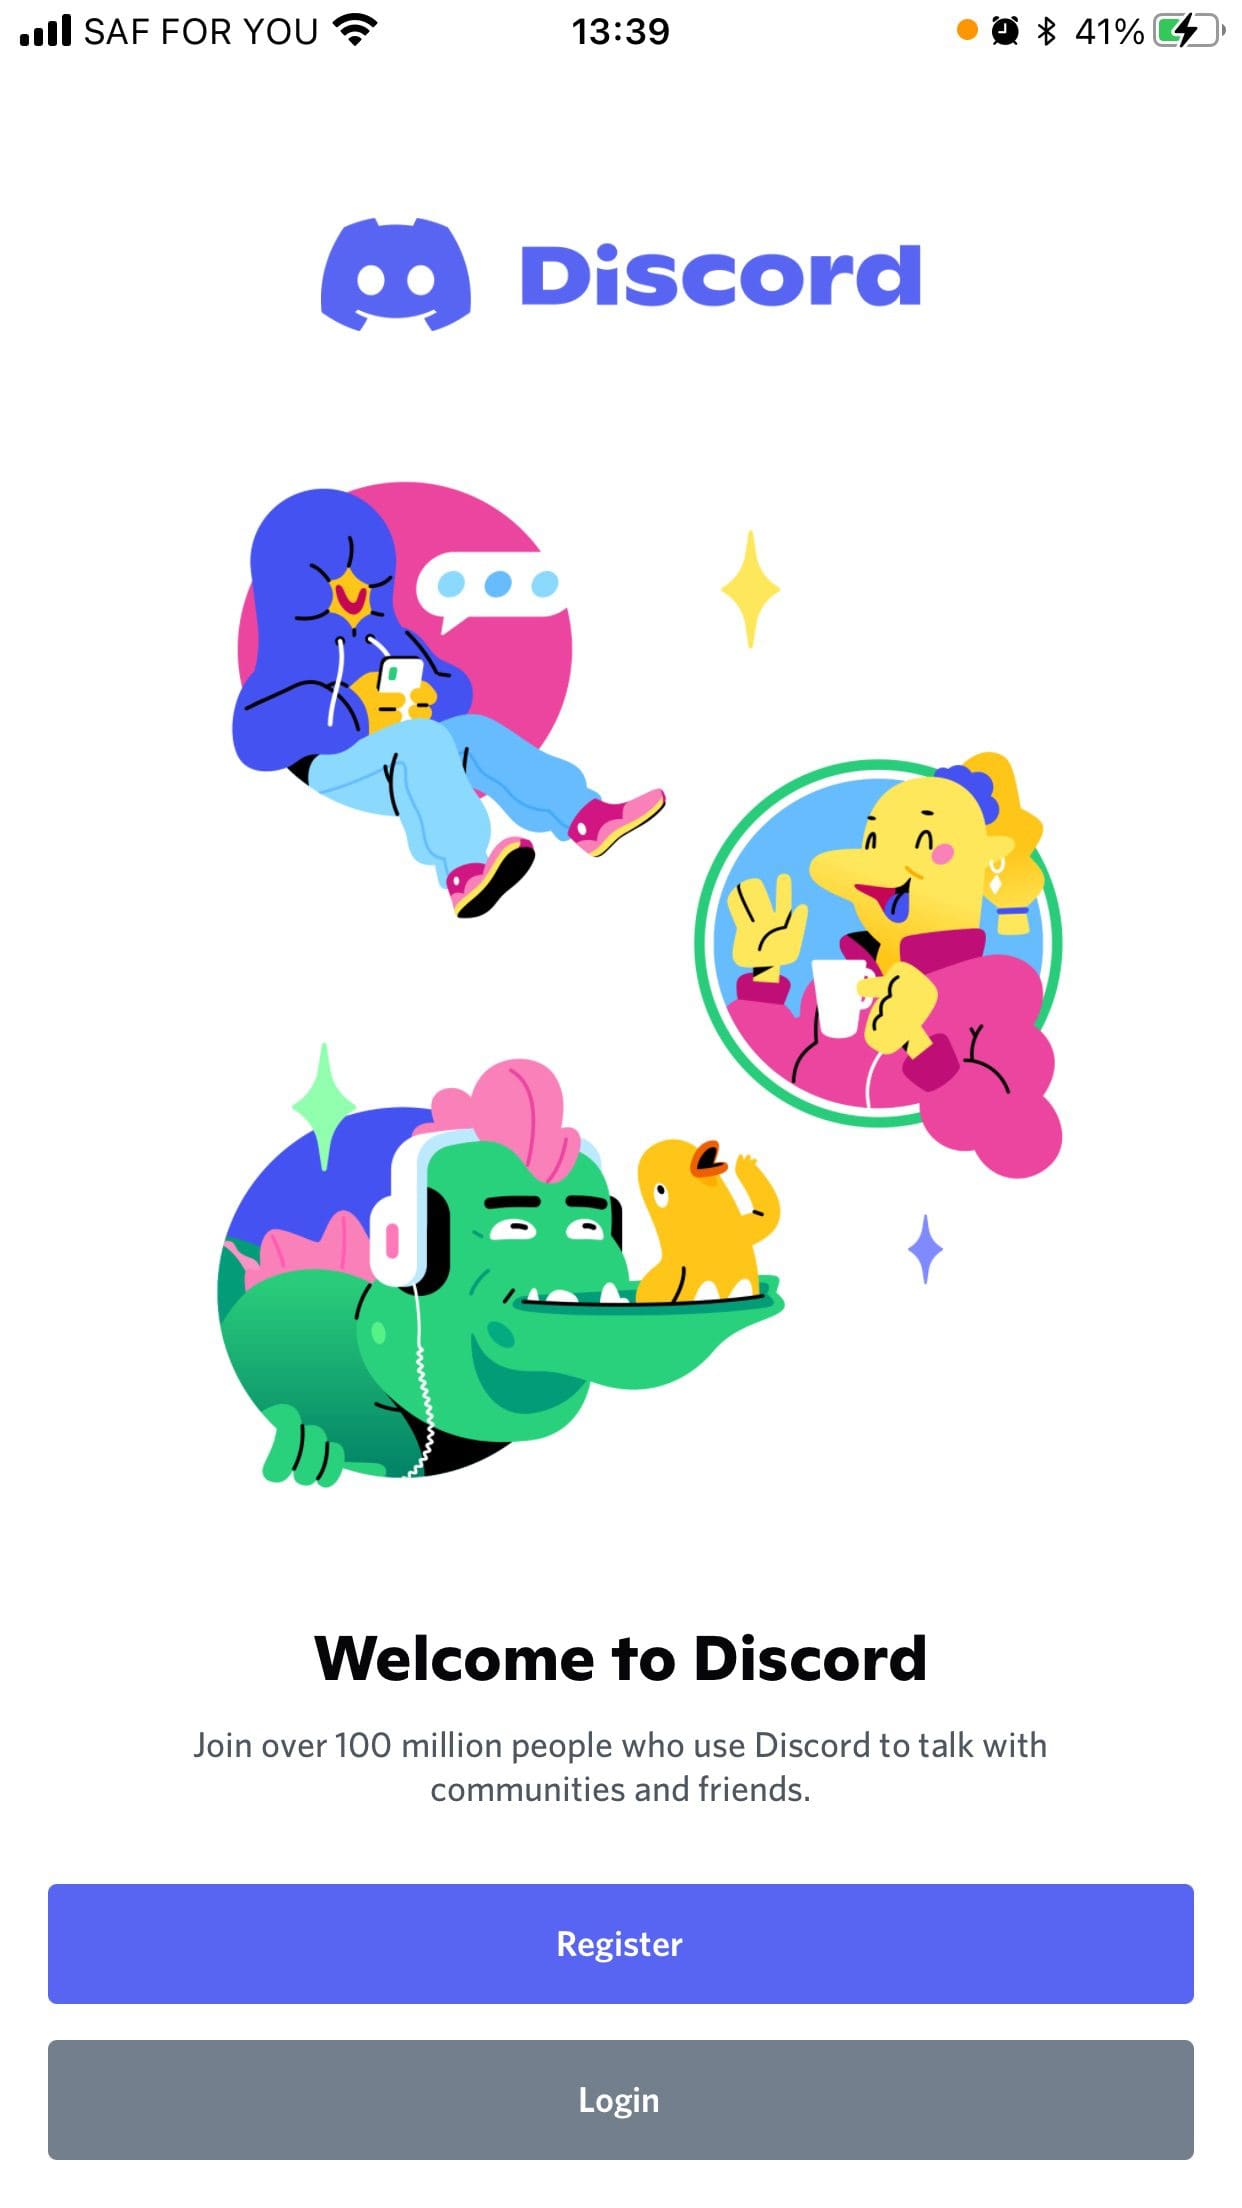 Login to your Discord account